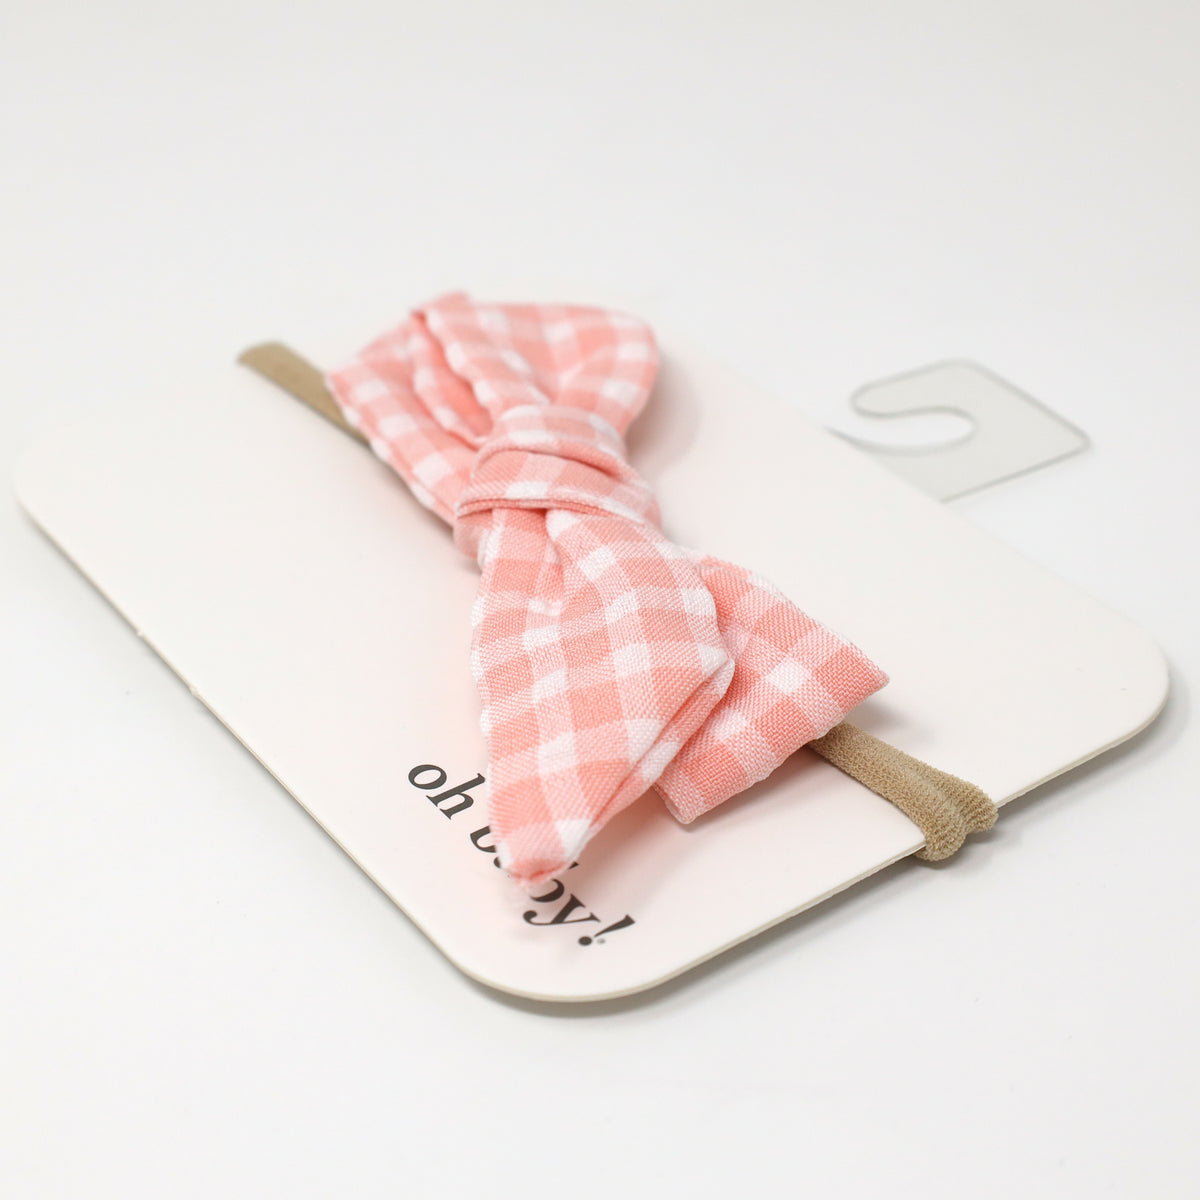 oh baby! Gingham Tie Bow on Nylon Headband - Pale Pink